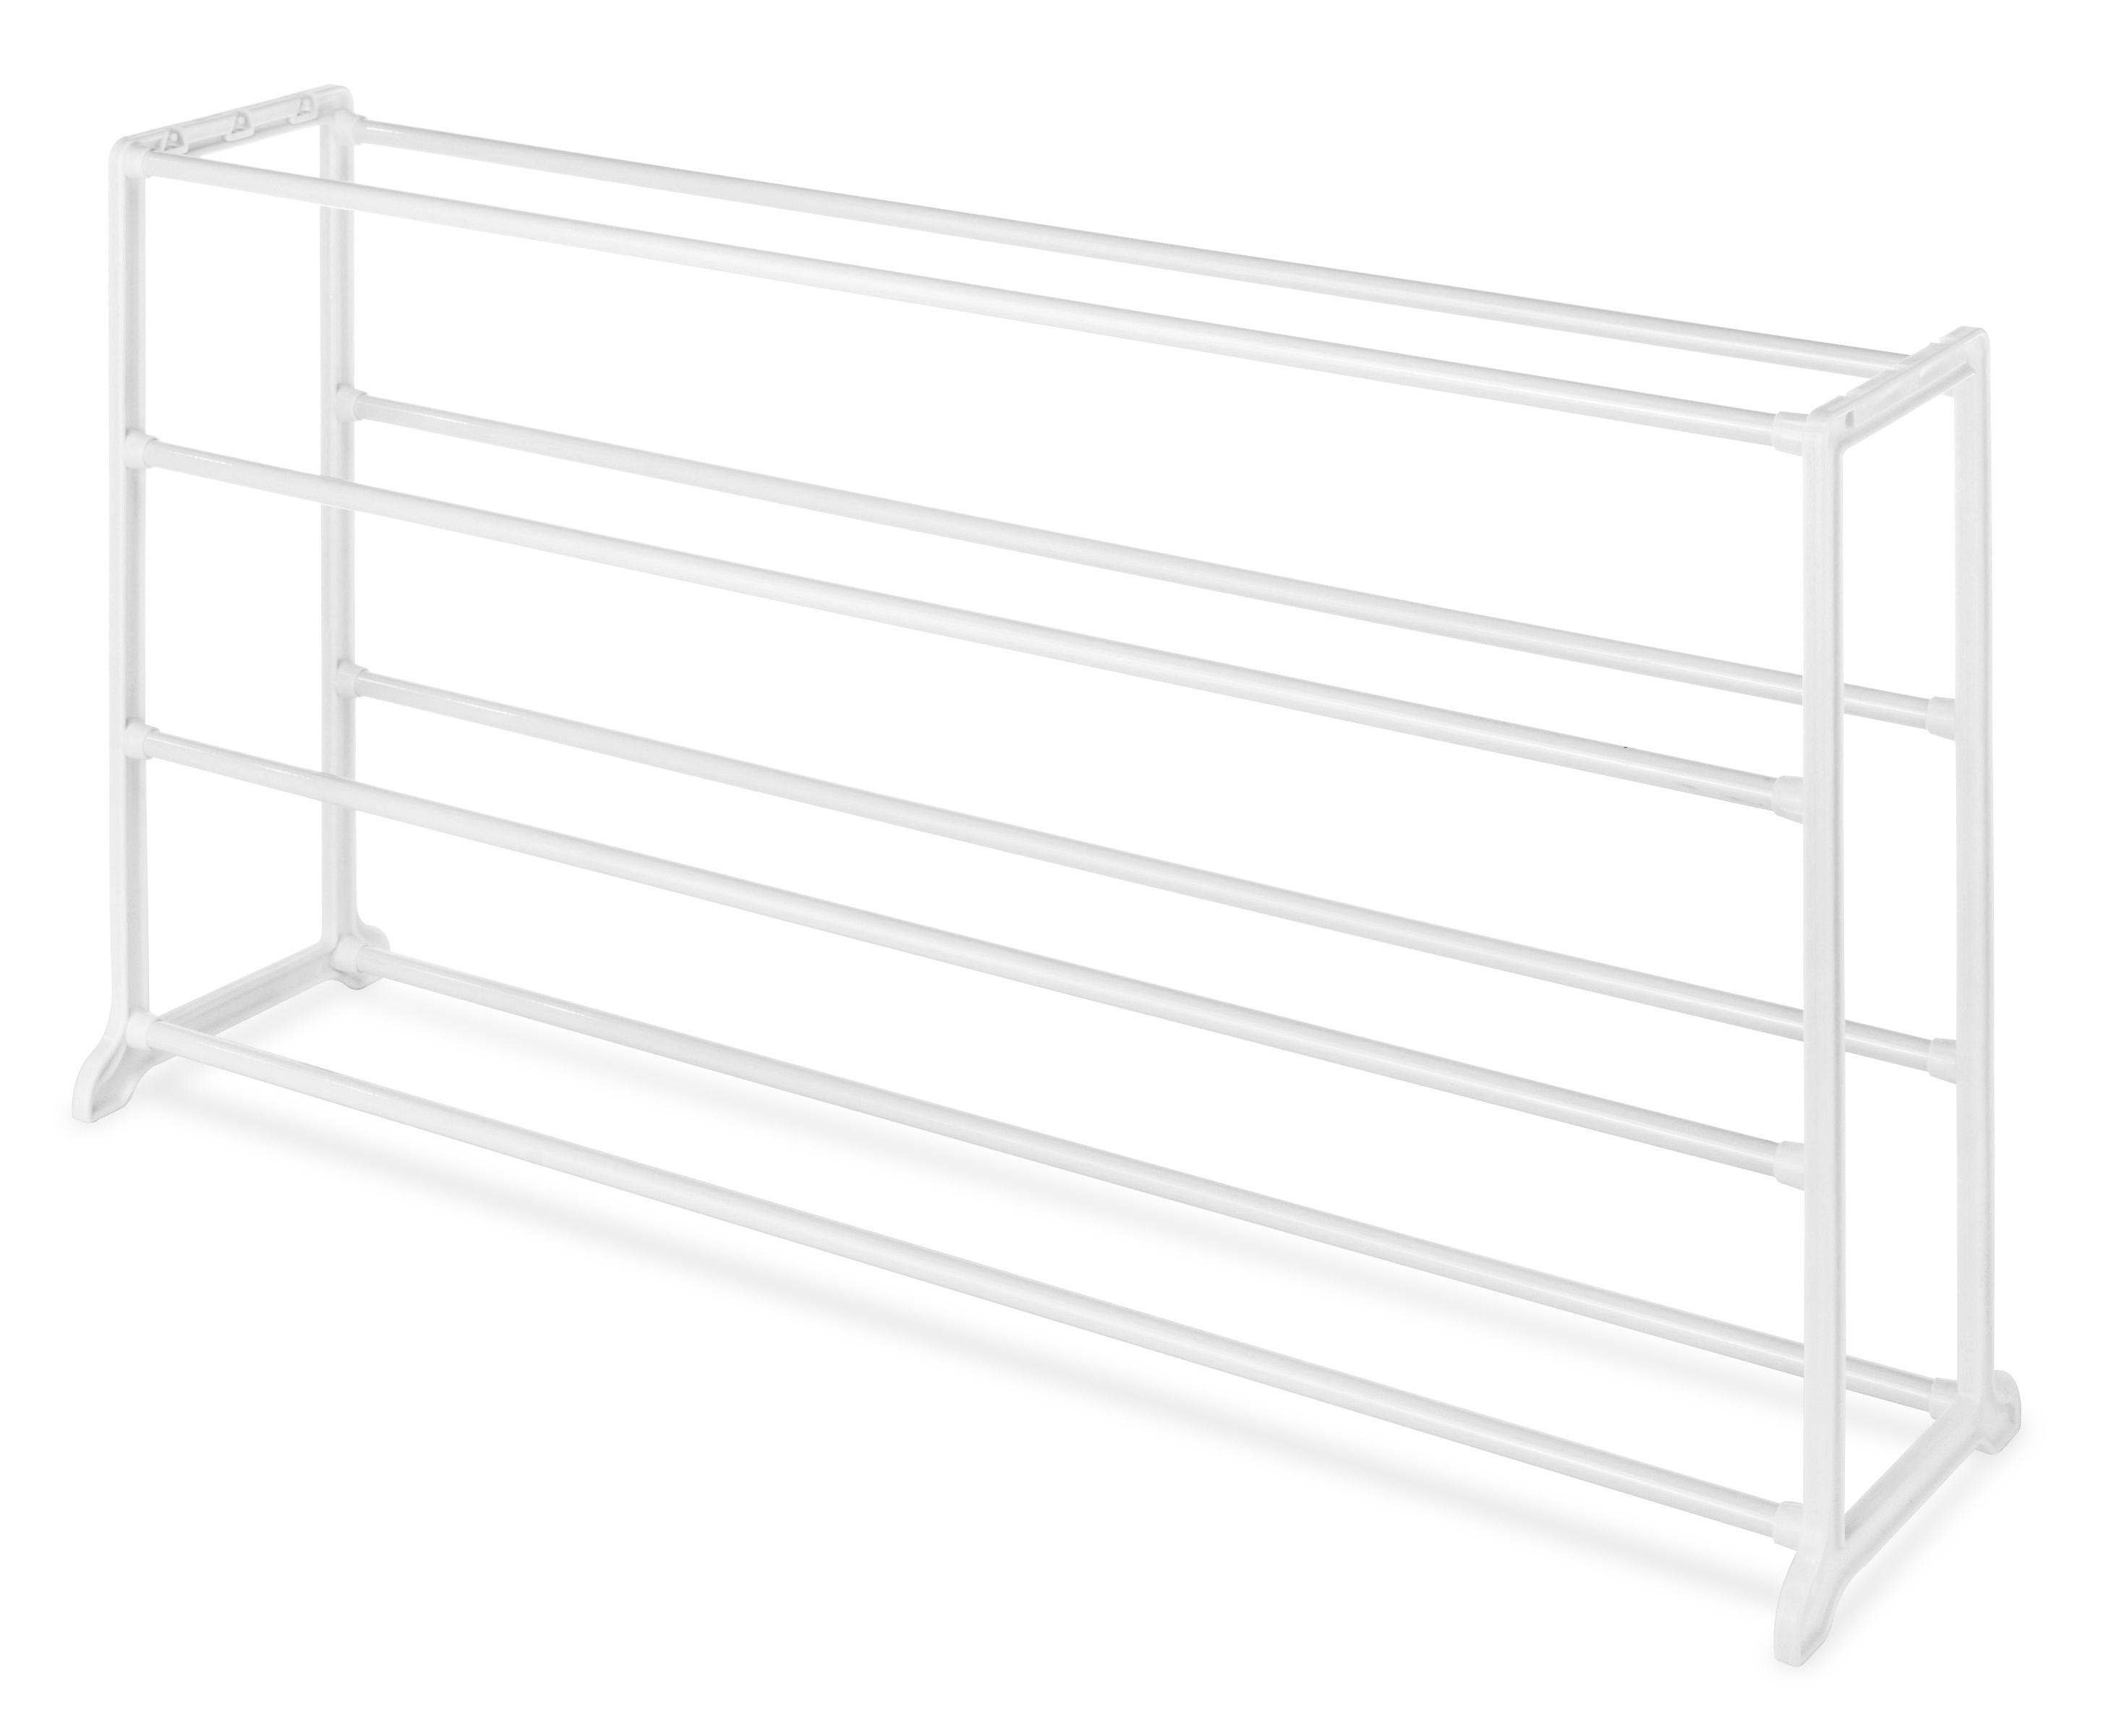 Entryway Type A Small 2-Tier Shoe Rack White Wooden Hallway and Closet for Bedroom 6-Pair Utility Storage Organizer